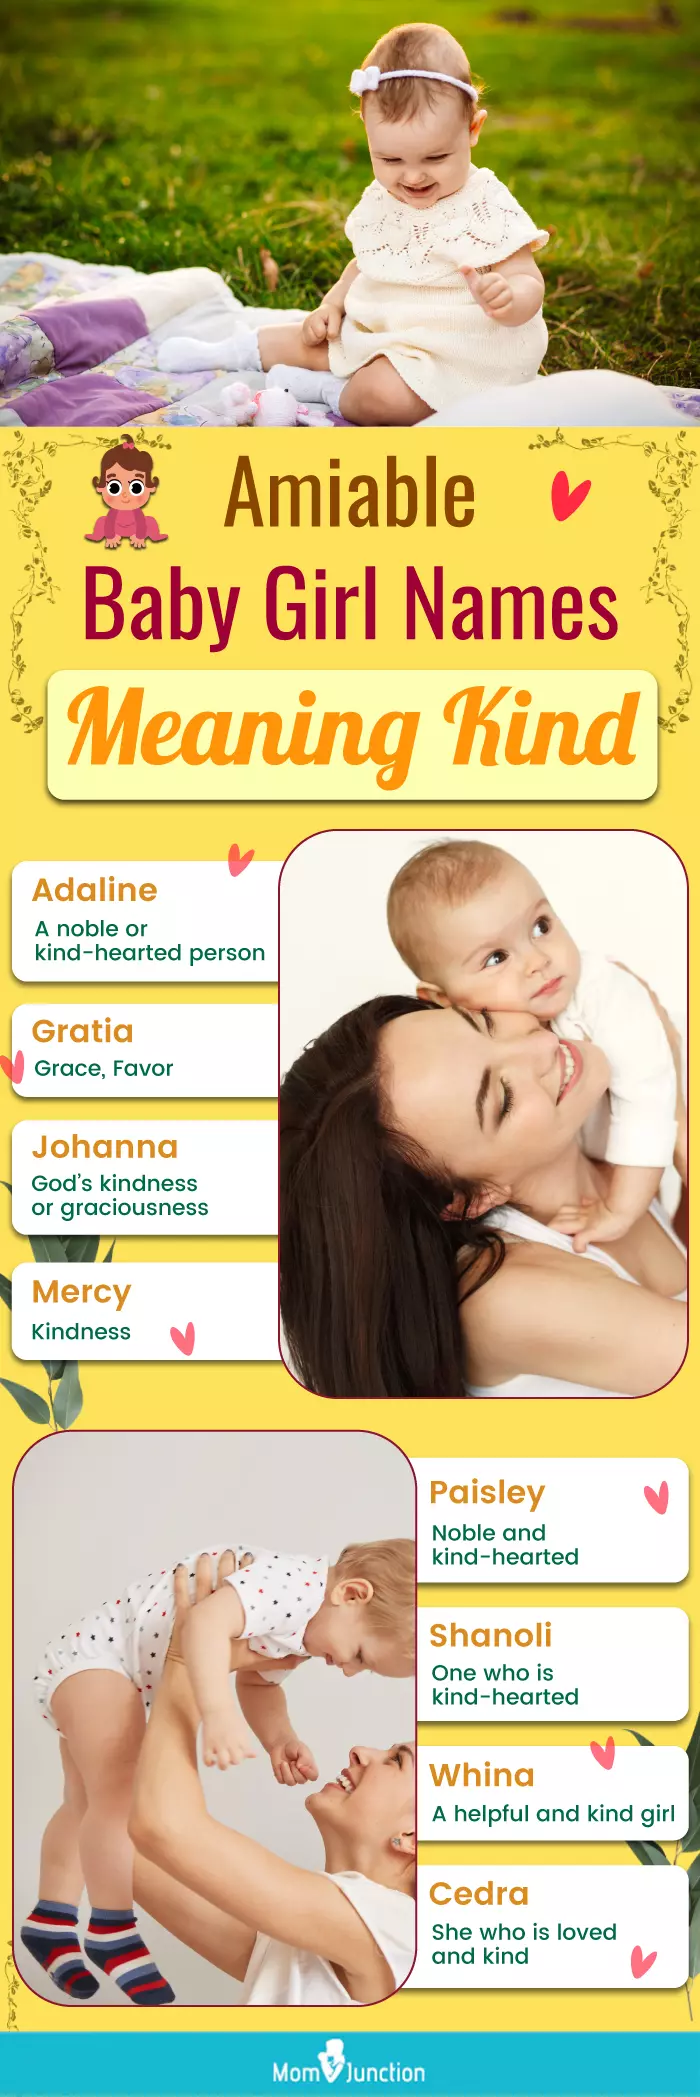 amiable baby girl names meaning kind (infographic)